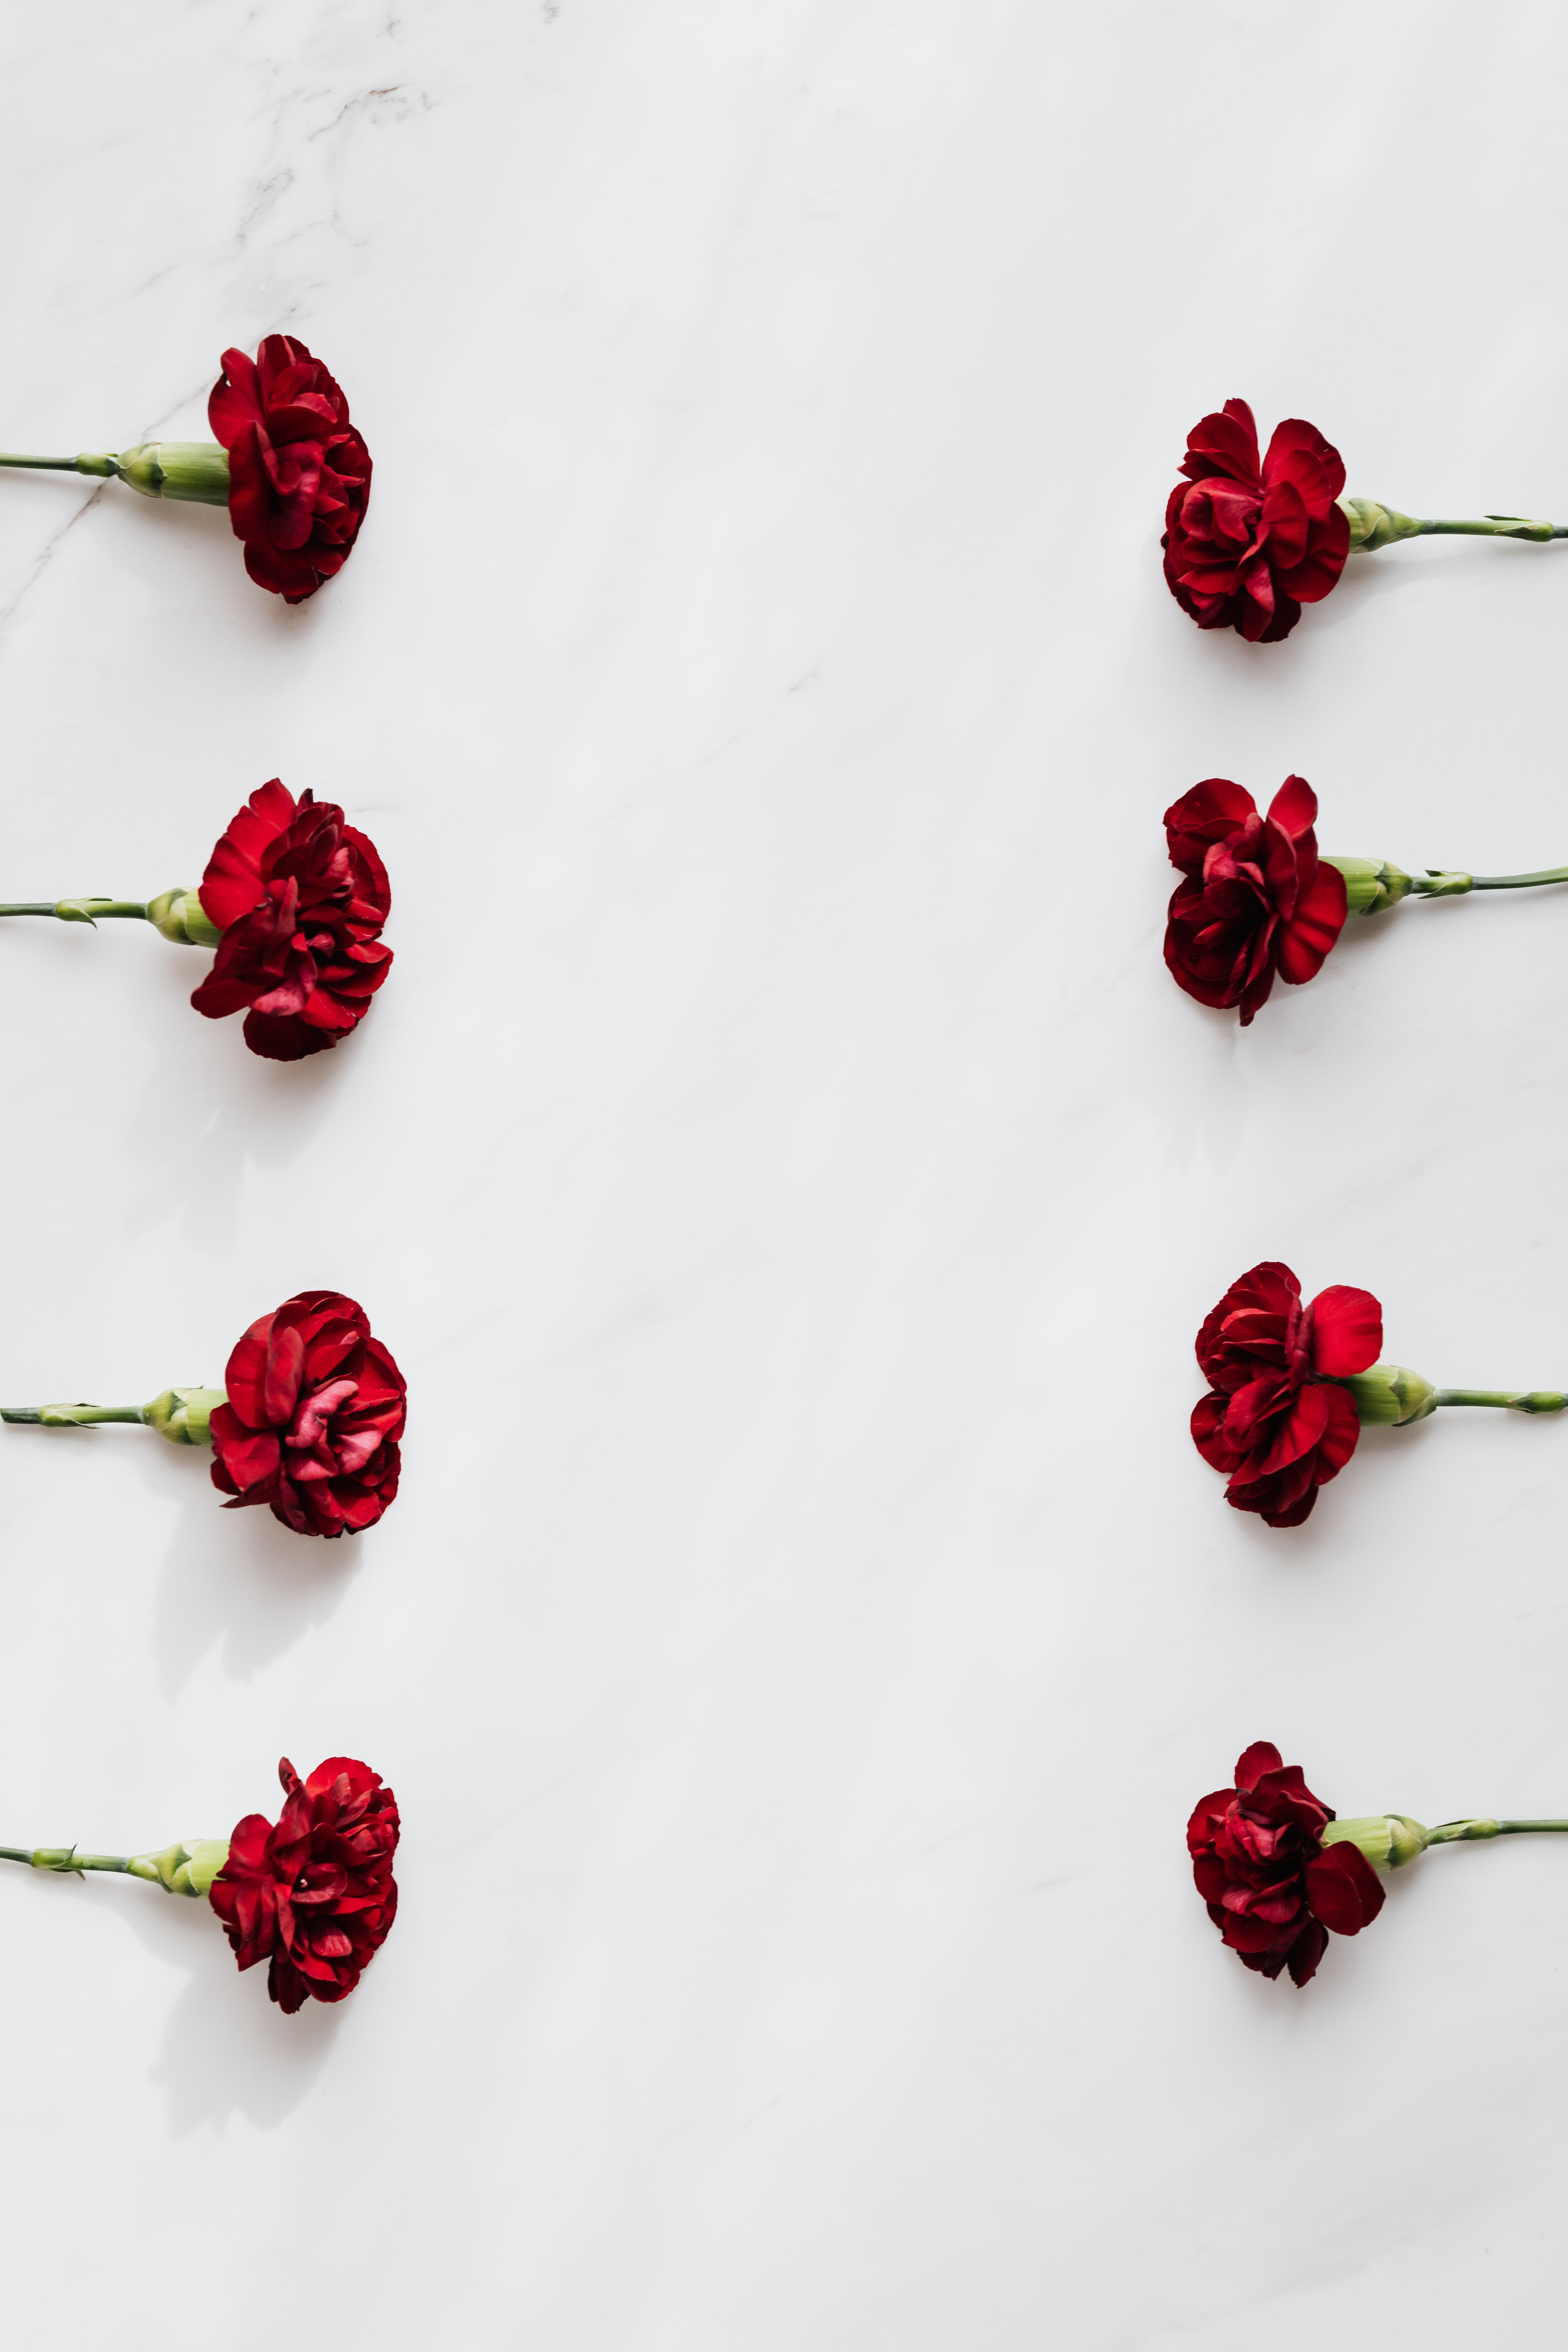 Dark red carnations on white backgrounds · Free Stock Photo